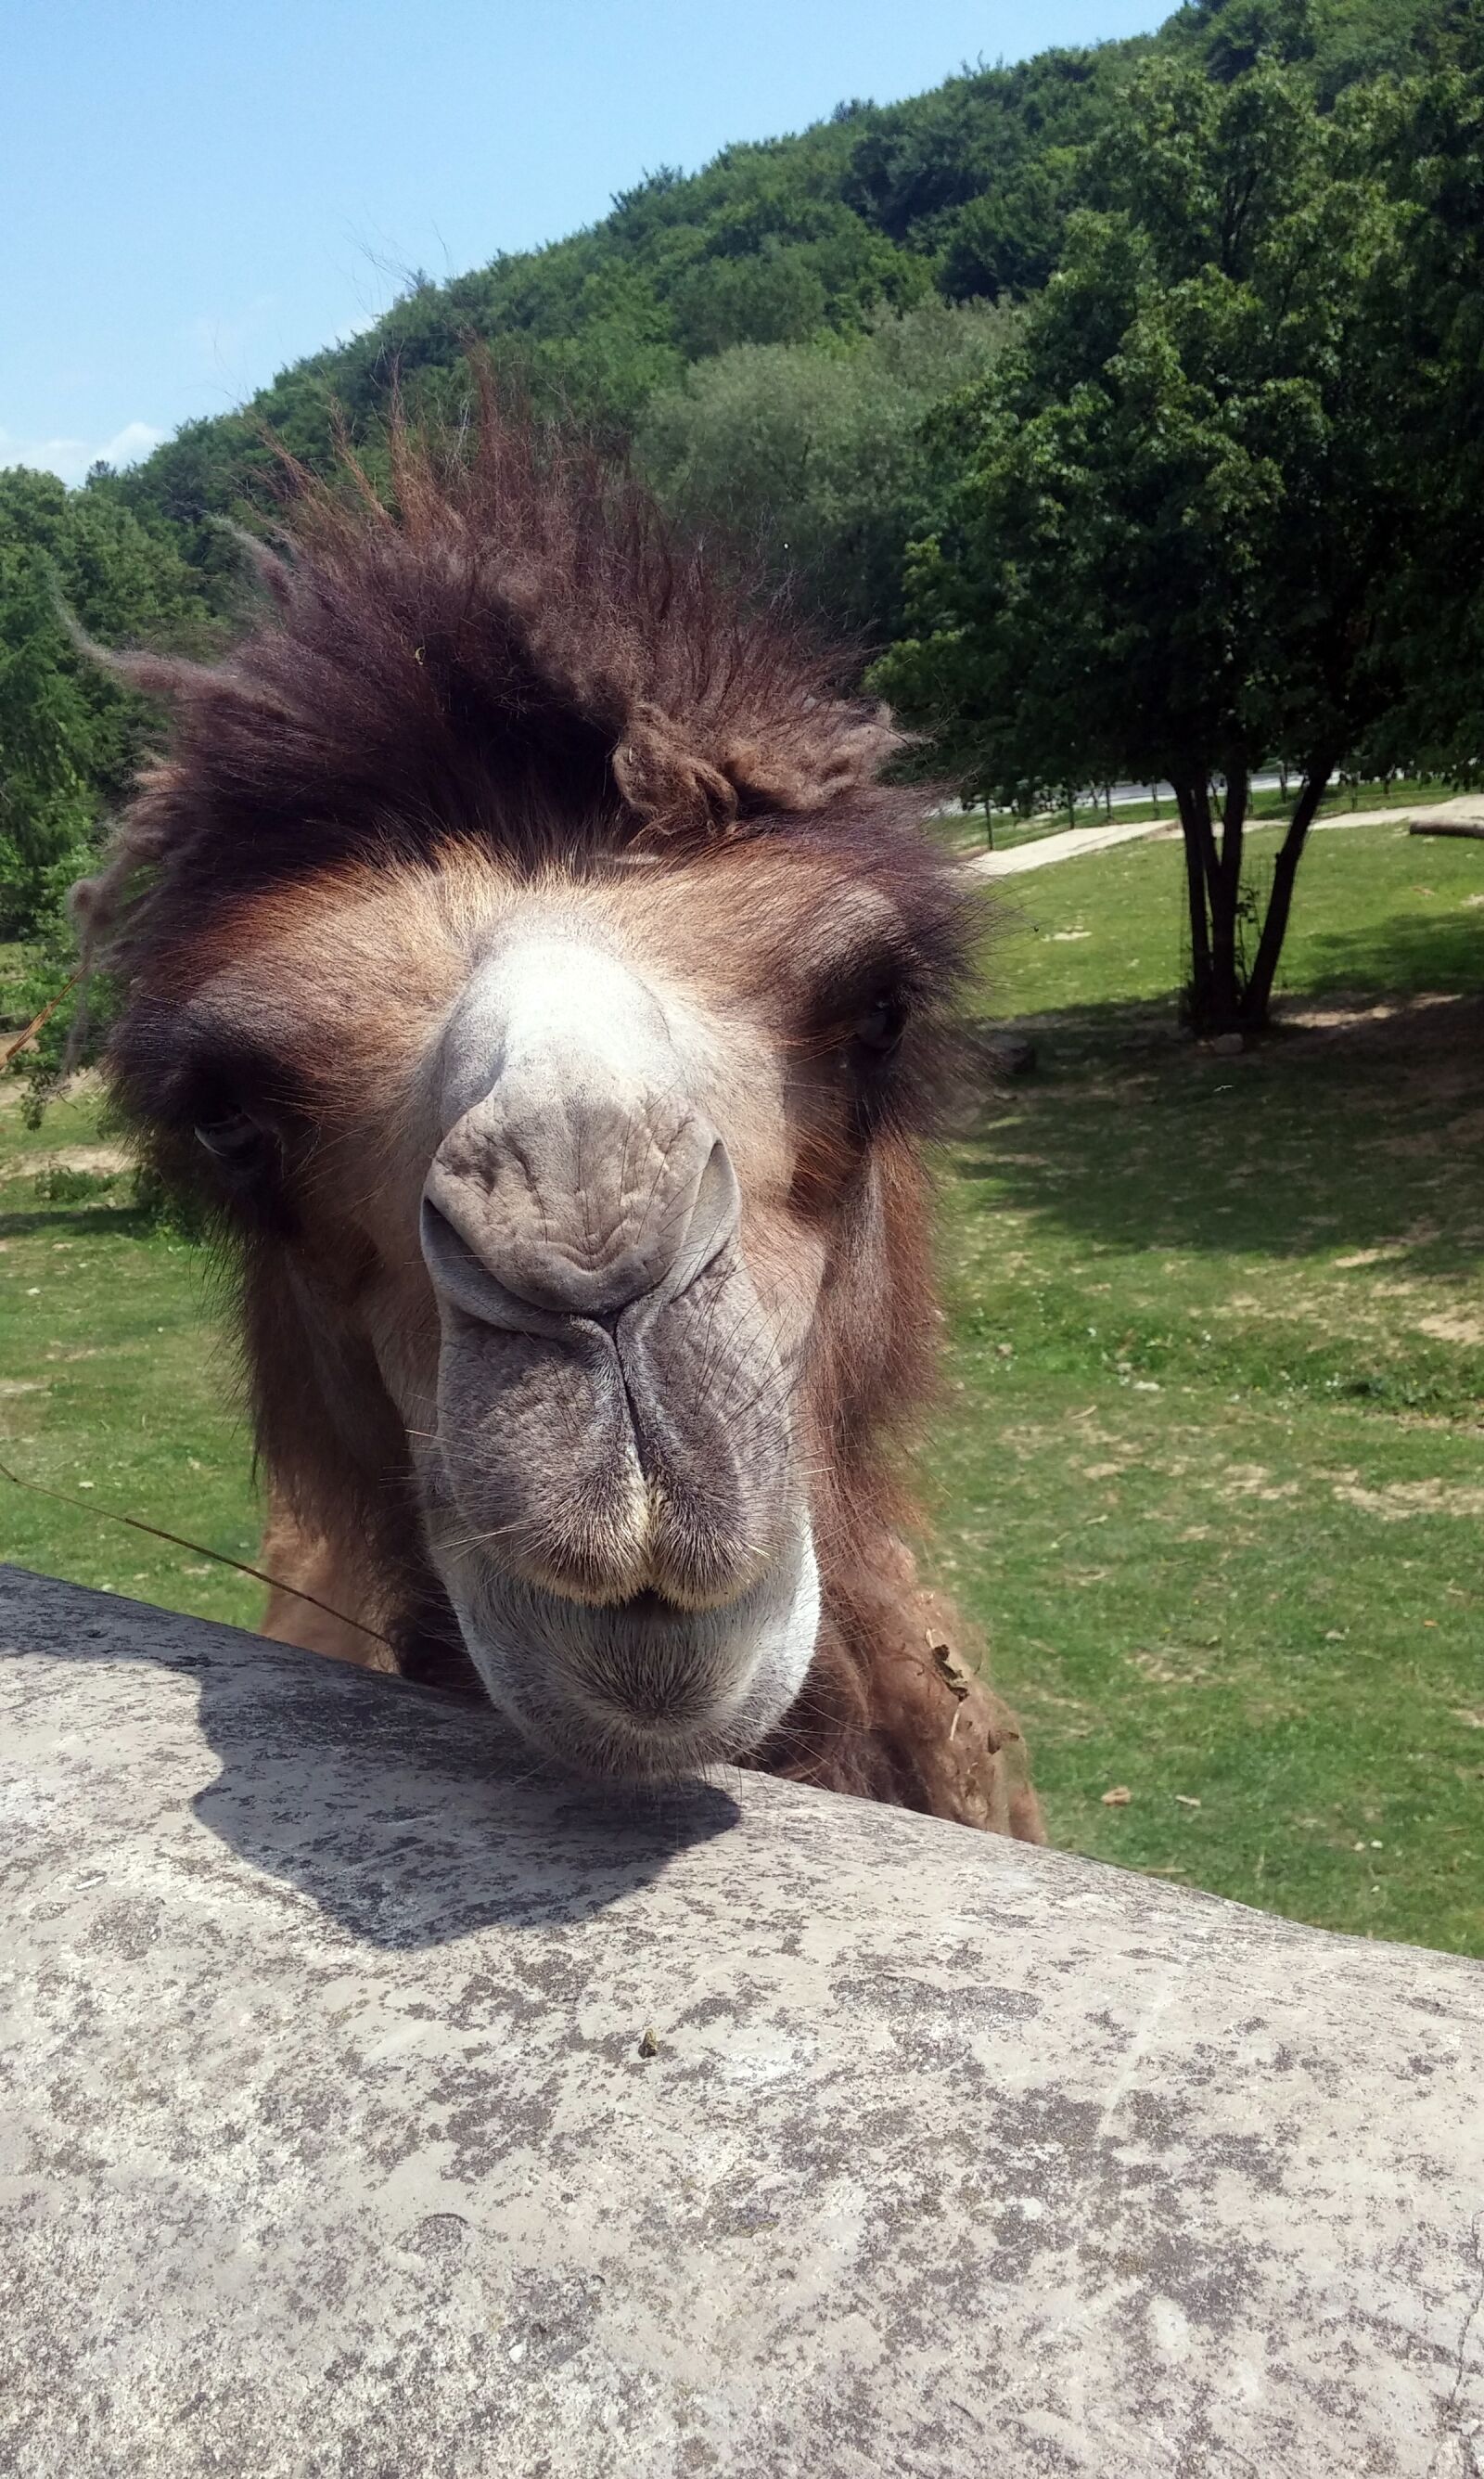 LG G3 sample photo. The zoo, camel, funny photography